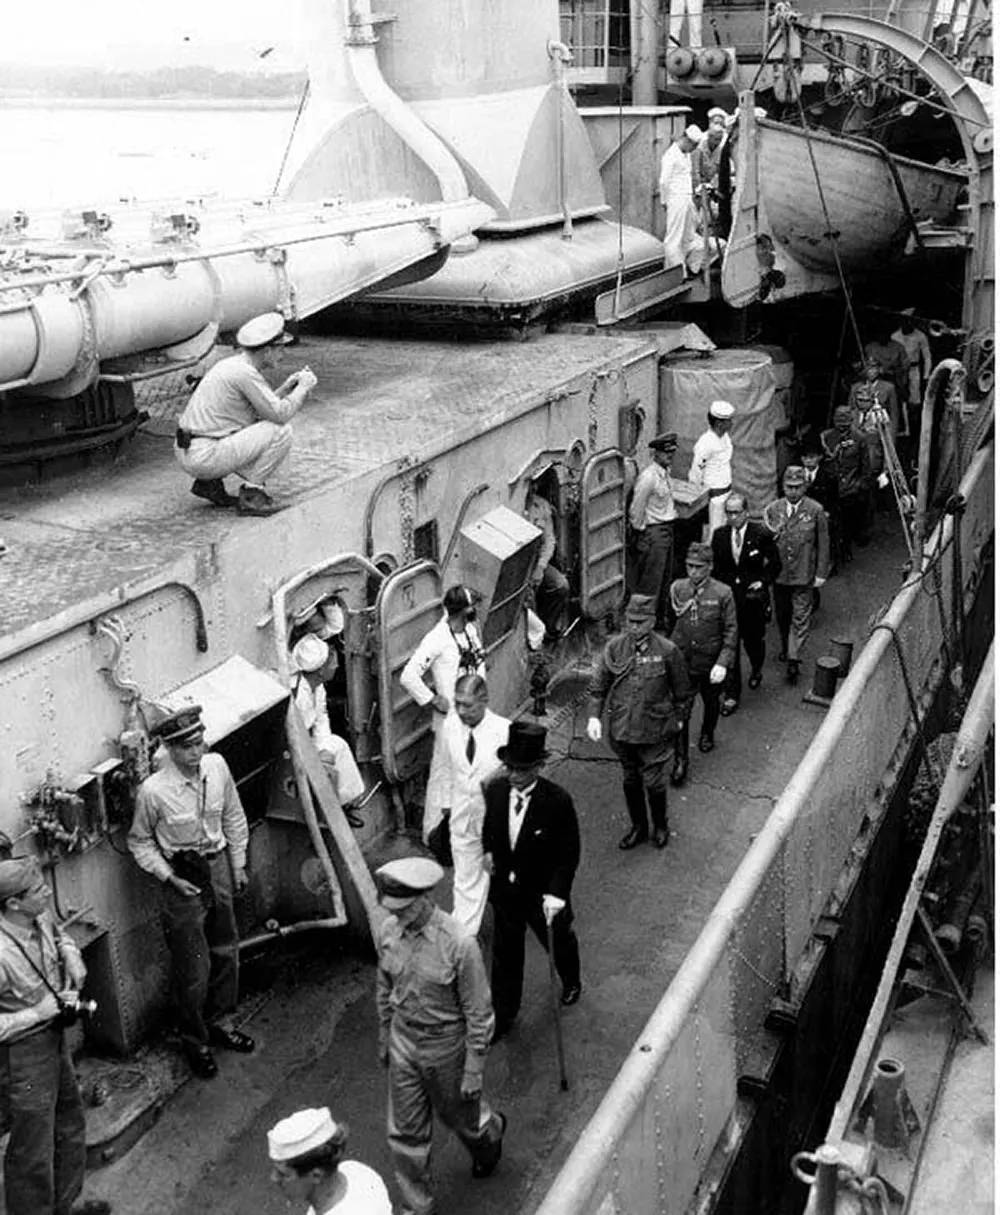 Japanese representatives follow their escort officer along the deck of USS Lansdowne (DD-486), after the surrender ceremonies.